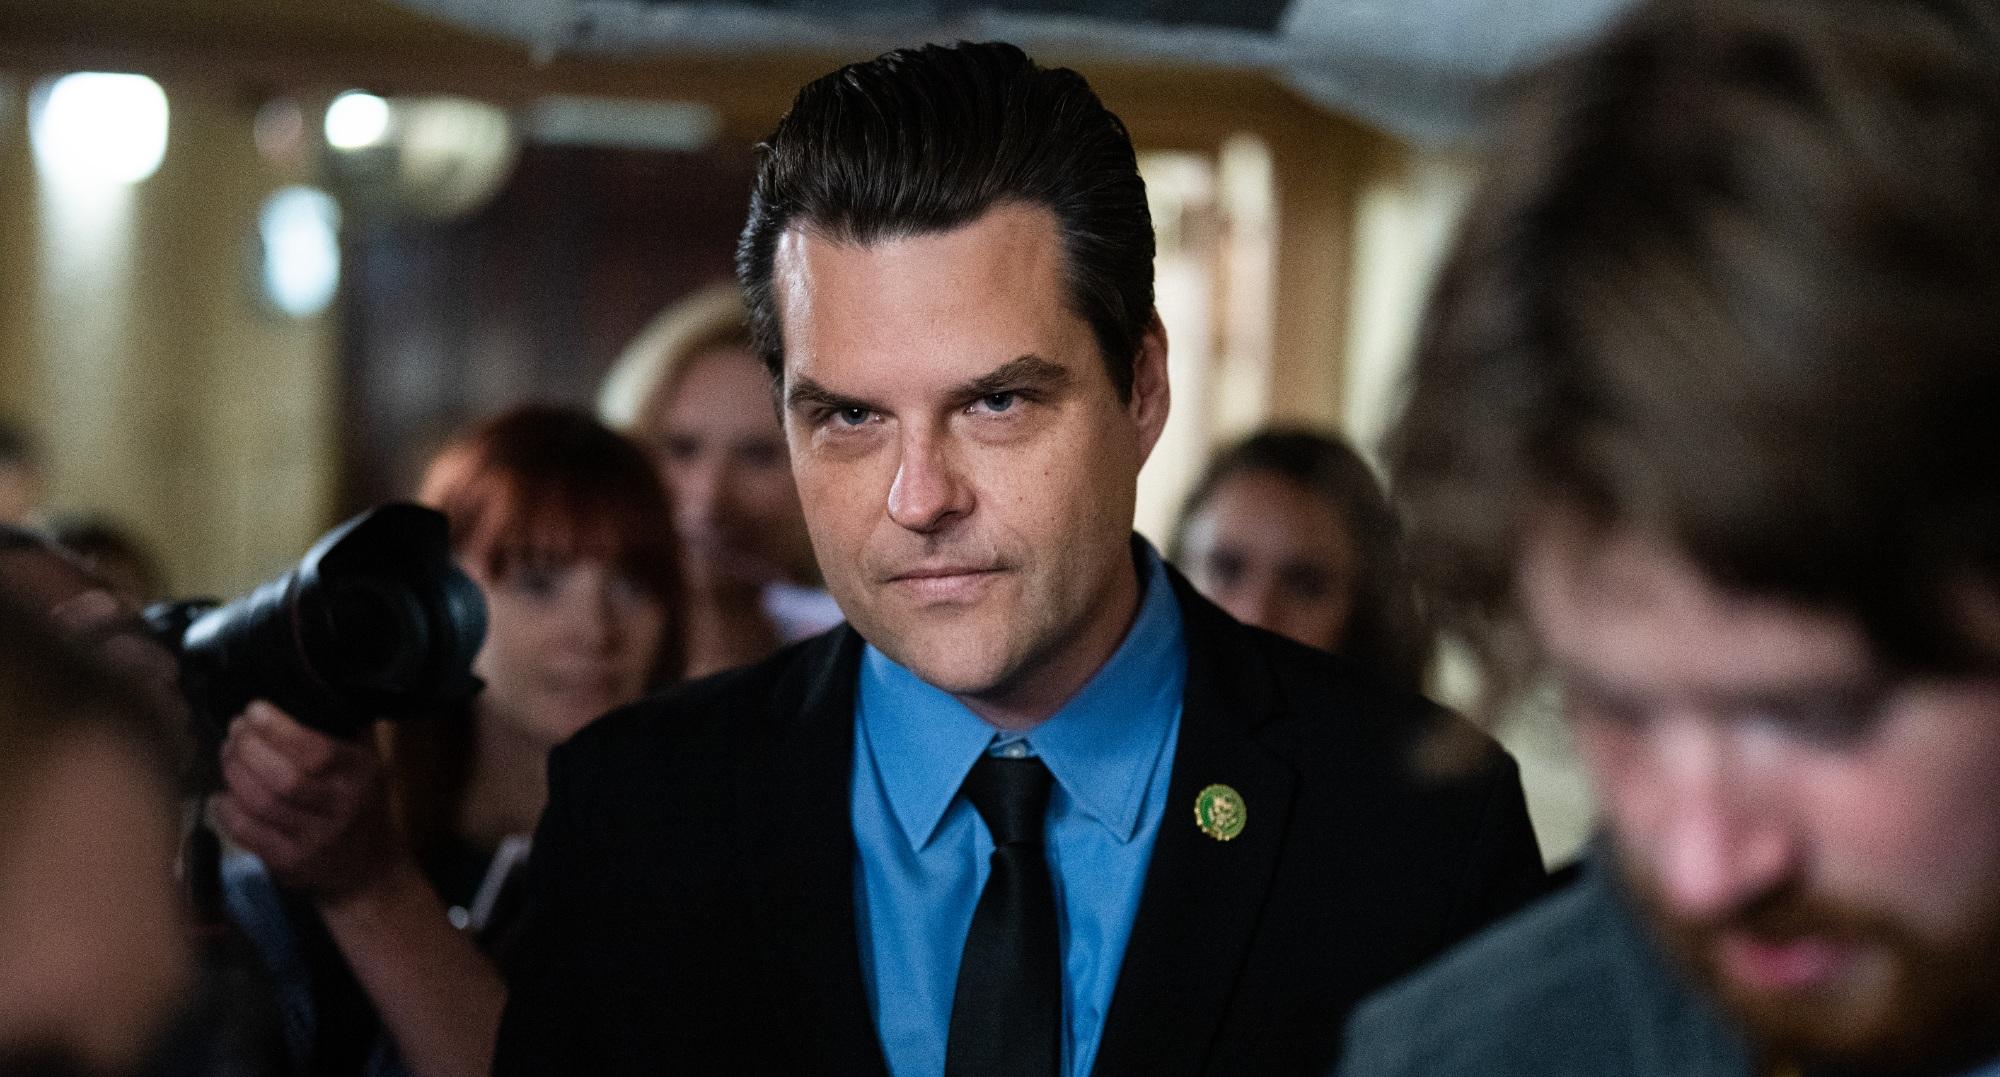 Rep. Matt Gaetz, R-Fla., leaves a meeting of the House Republican Conference in the U.S. Capitol on Tuesday, September 19, 2023.